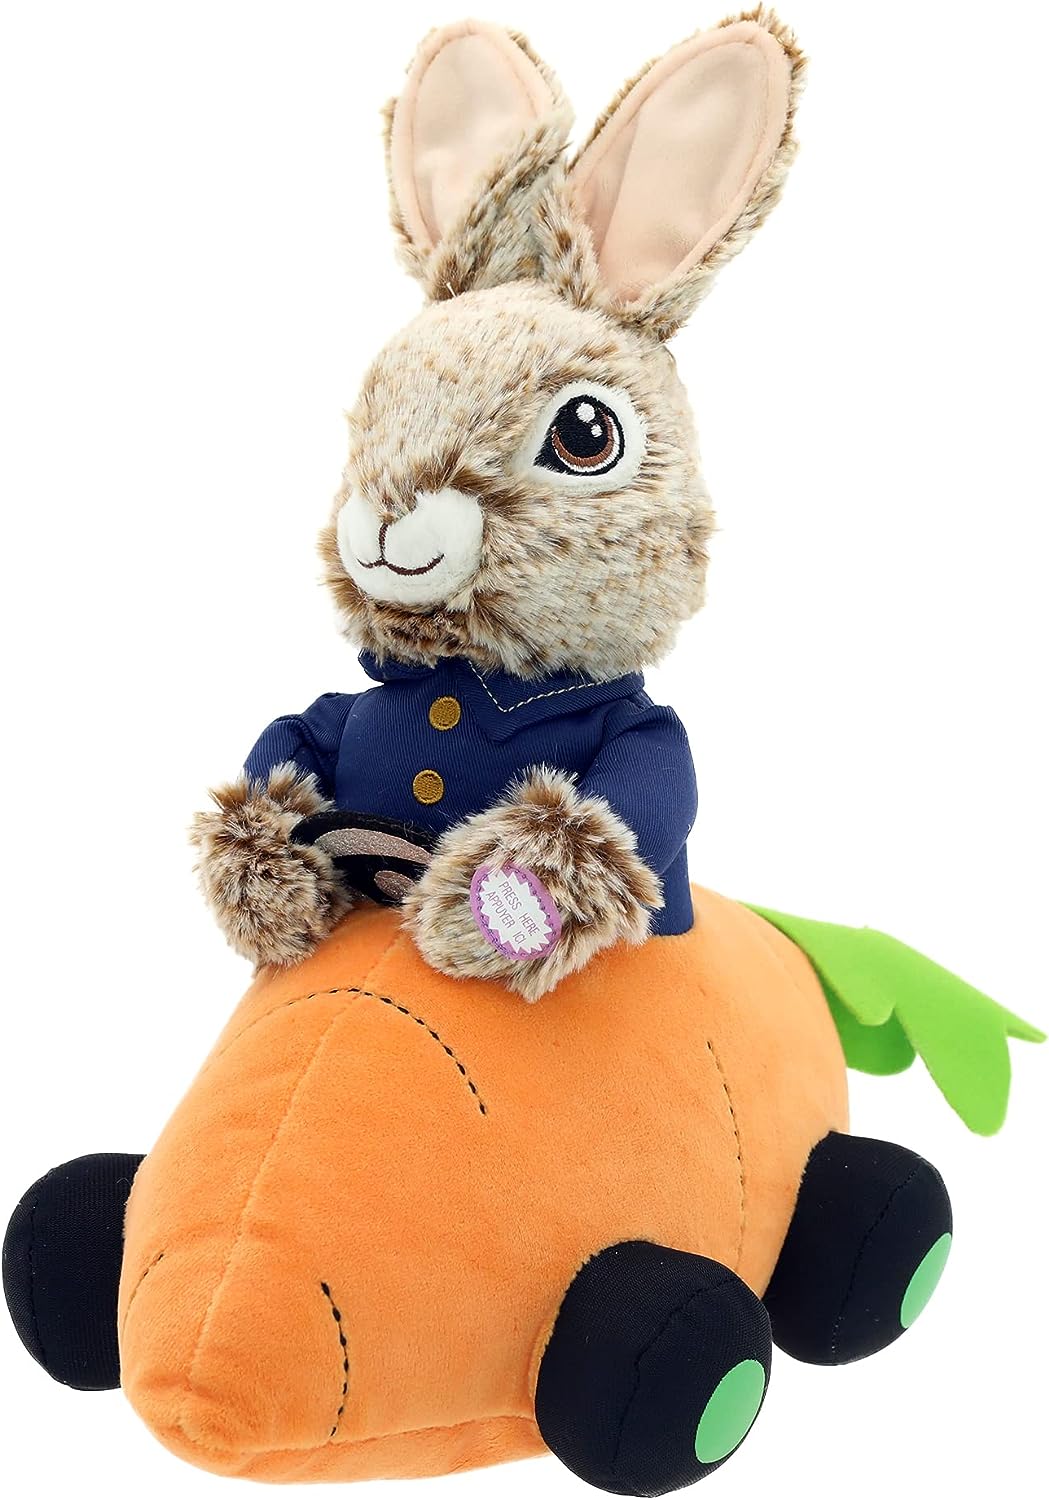 11" Animal Adventure Peter Rabbit Driving a Carrot Car Singing Animated Plush $7.88 & More + Free Shipping w/ Prime or on $35+